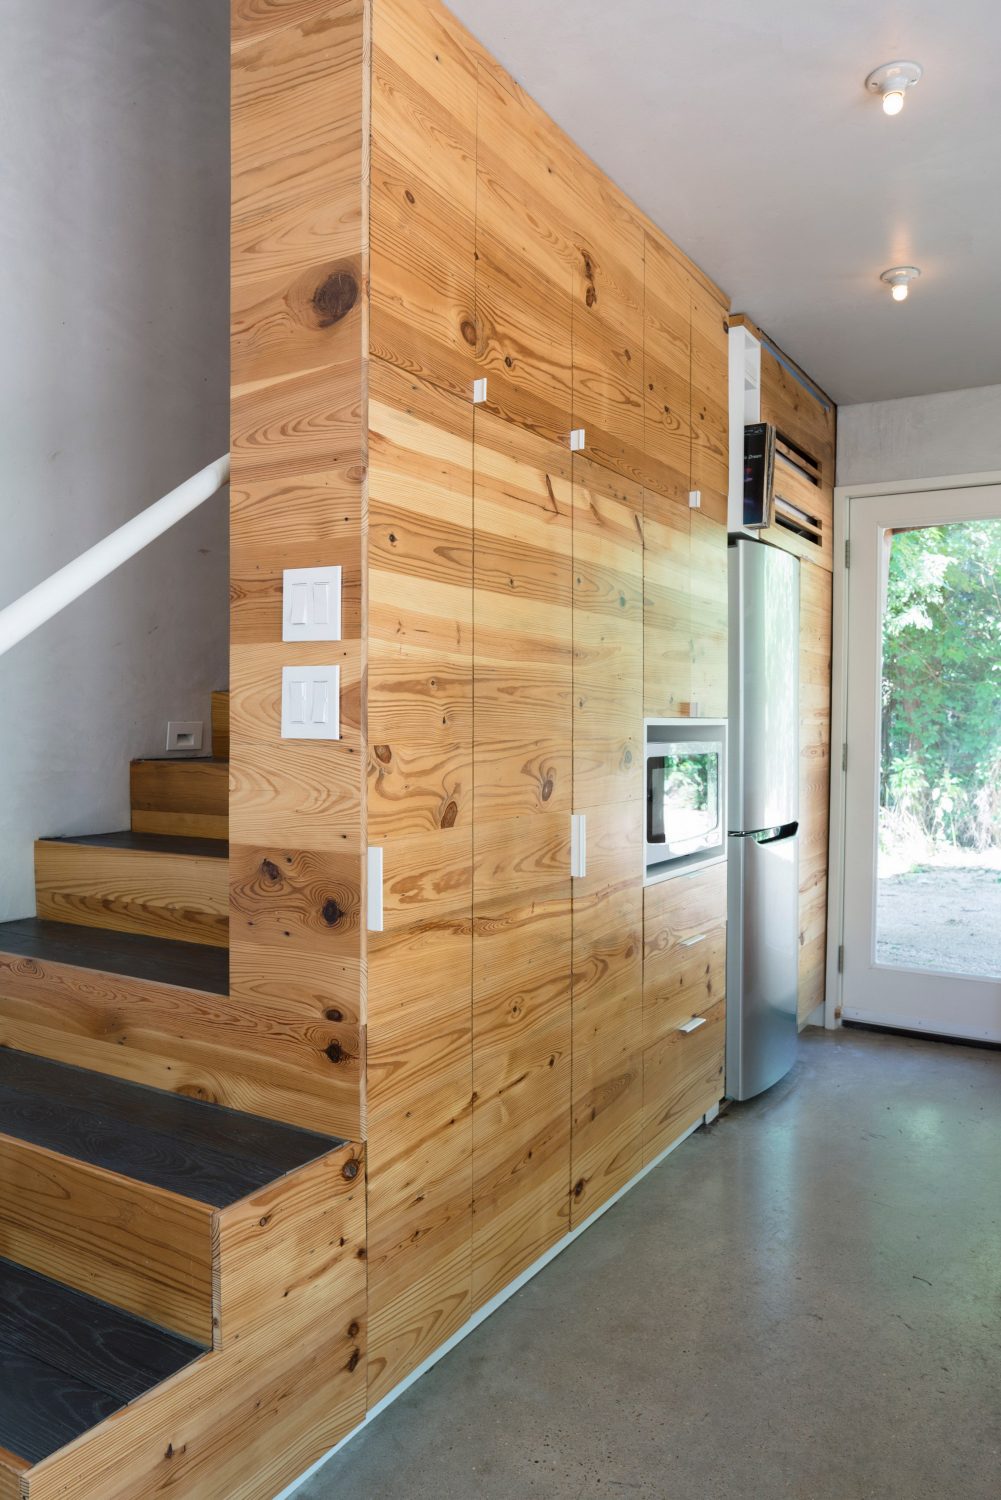 The Hive – Guest House in Austin by Studio 512